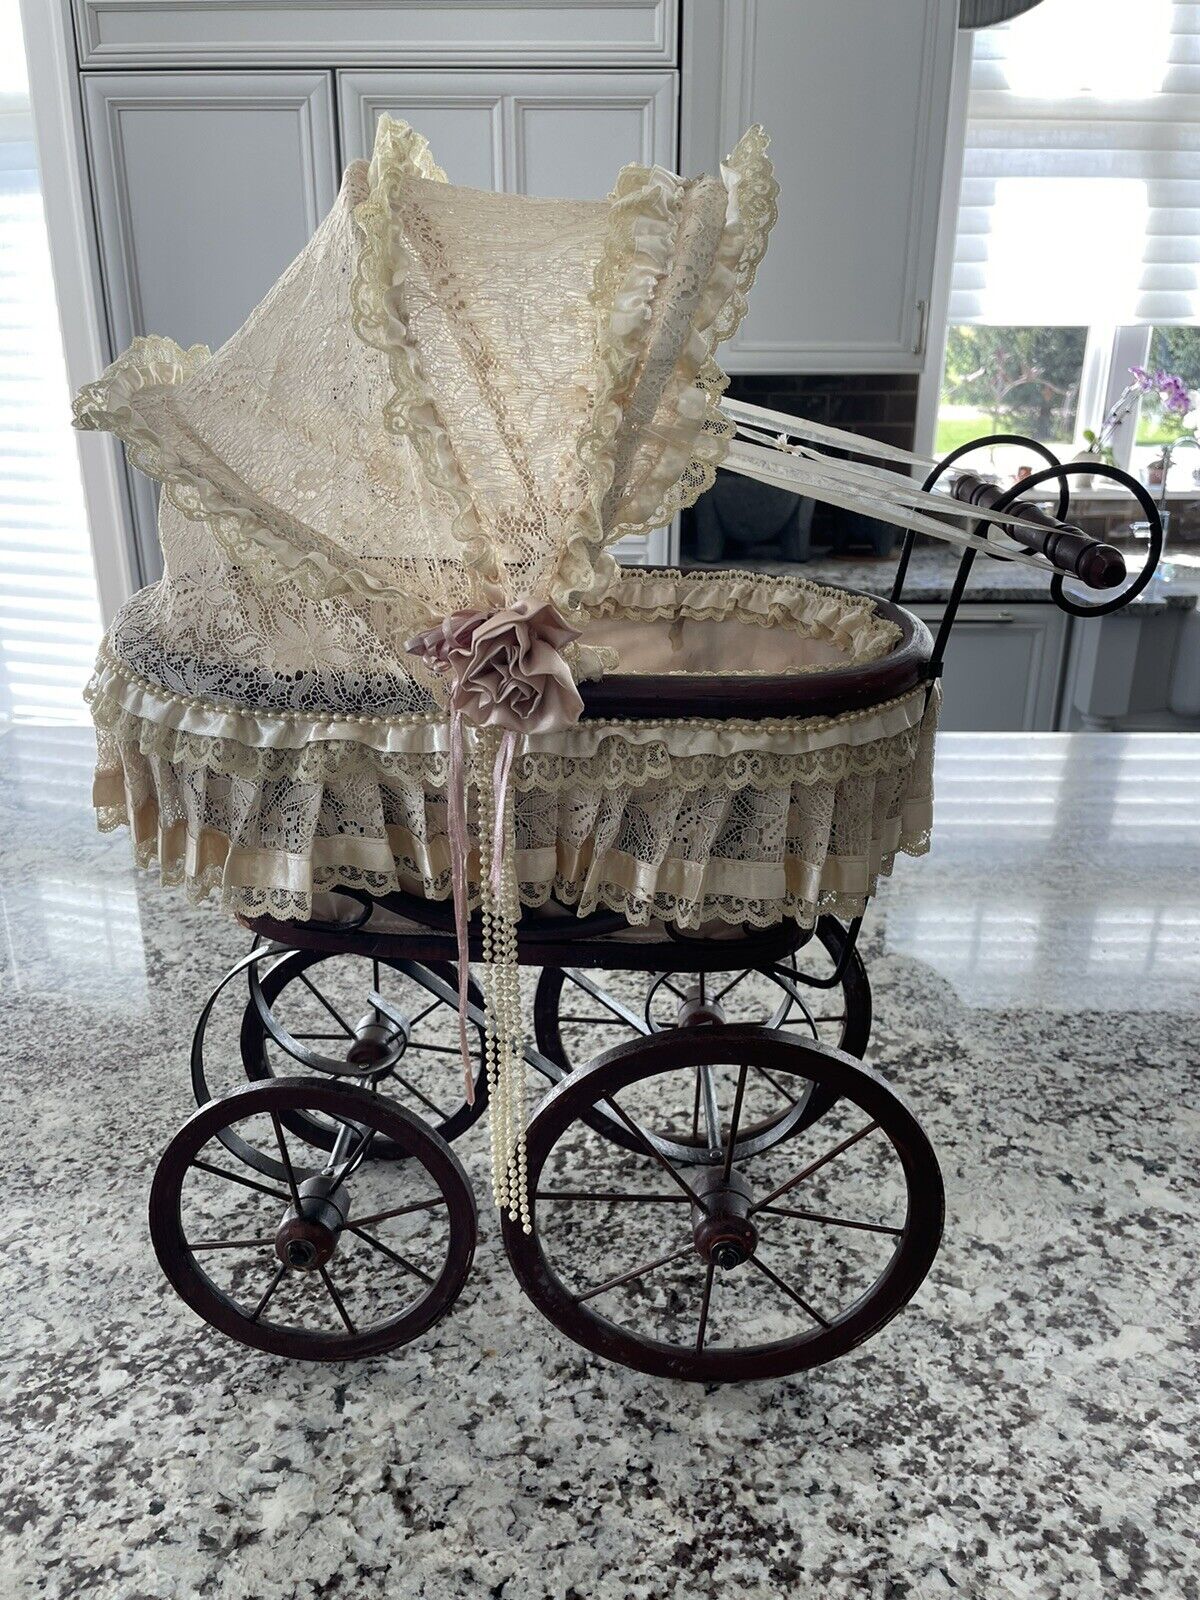 Antique Vintage Baby Doll Carriage, Pram, Victorian Style Wooden Stroller